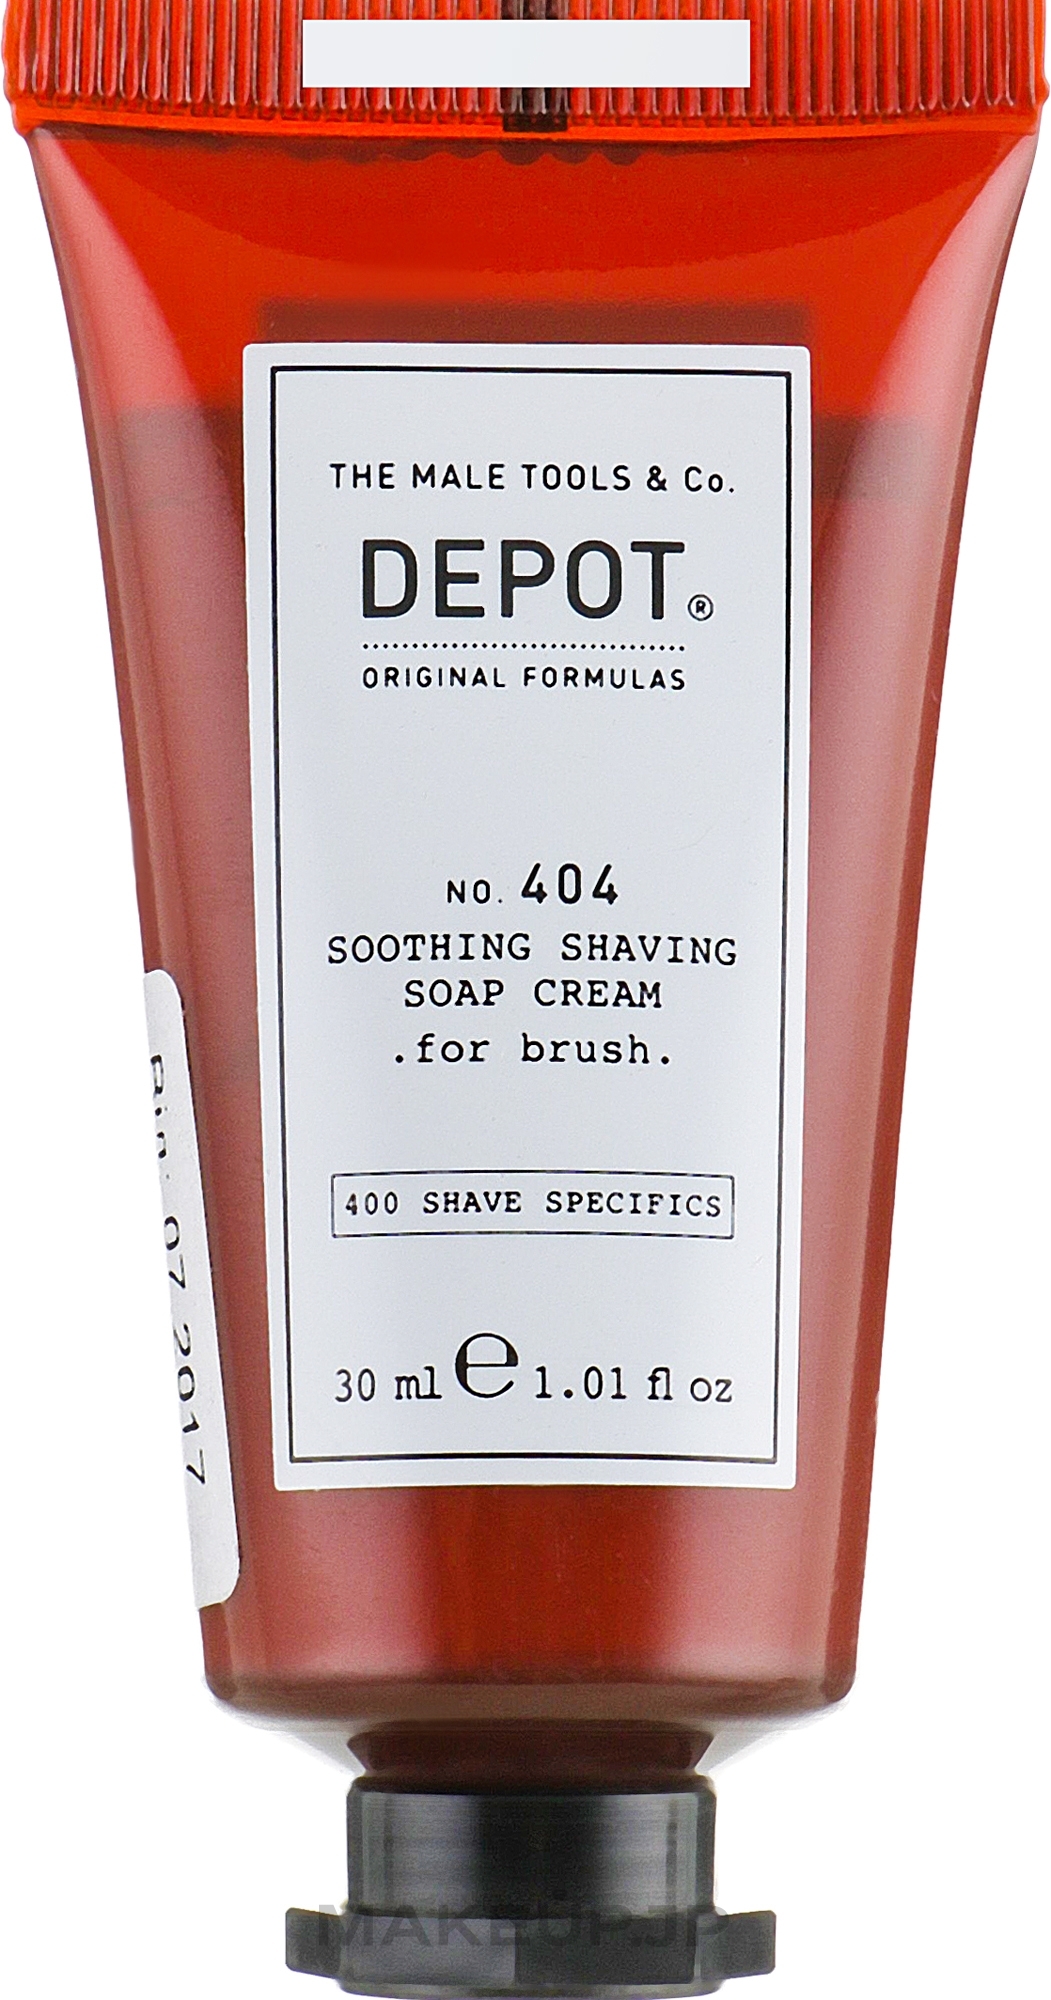 Soothing Shaving Cream - Depot Shave Specifics 404 Soothing Shaving Soap Cream — photo 30 ml